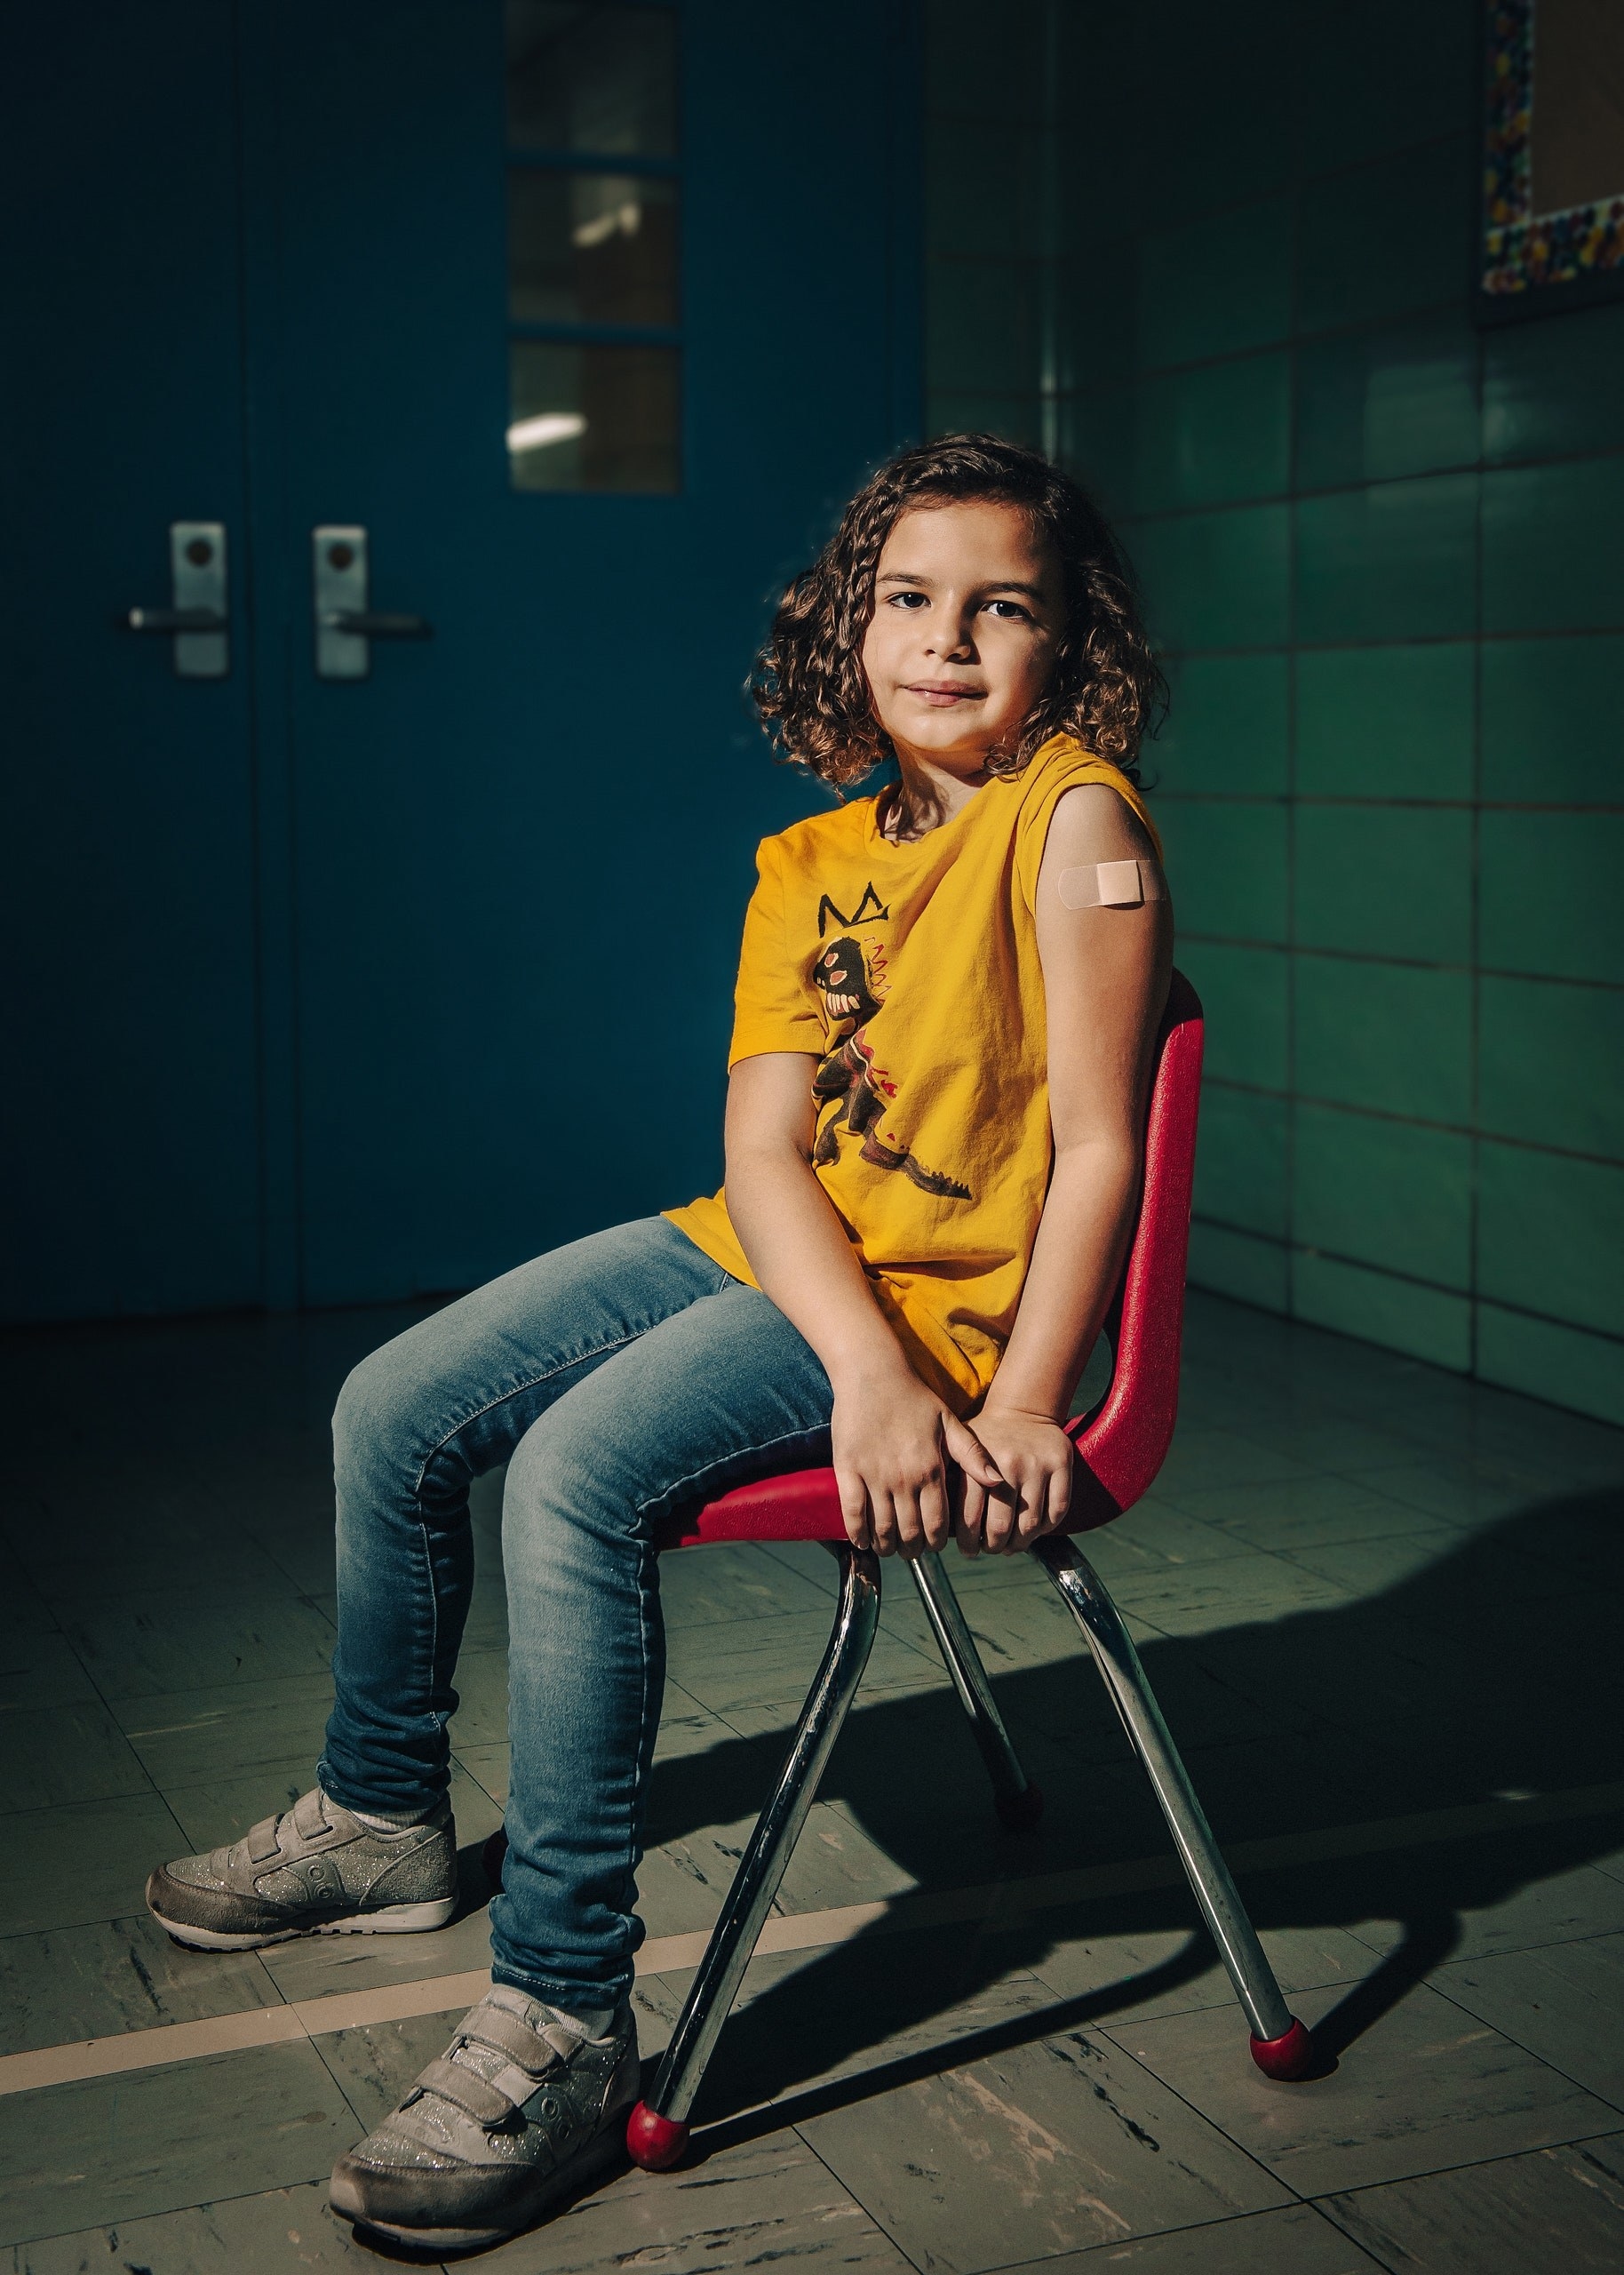 A little girl sits on a chair with a bandage on her left upper arm